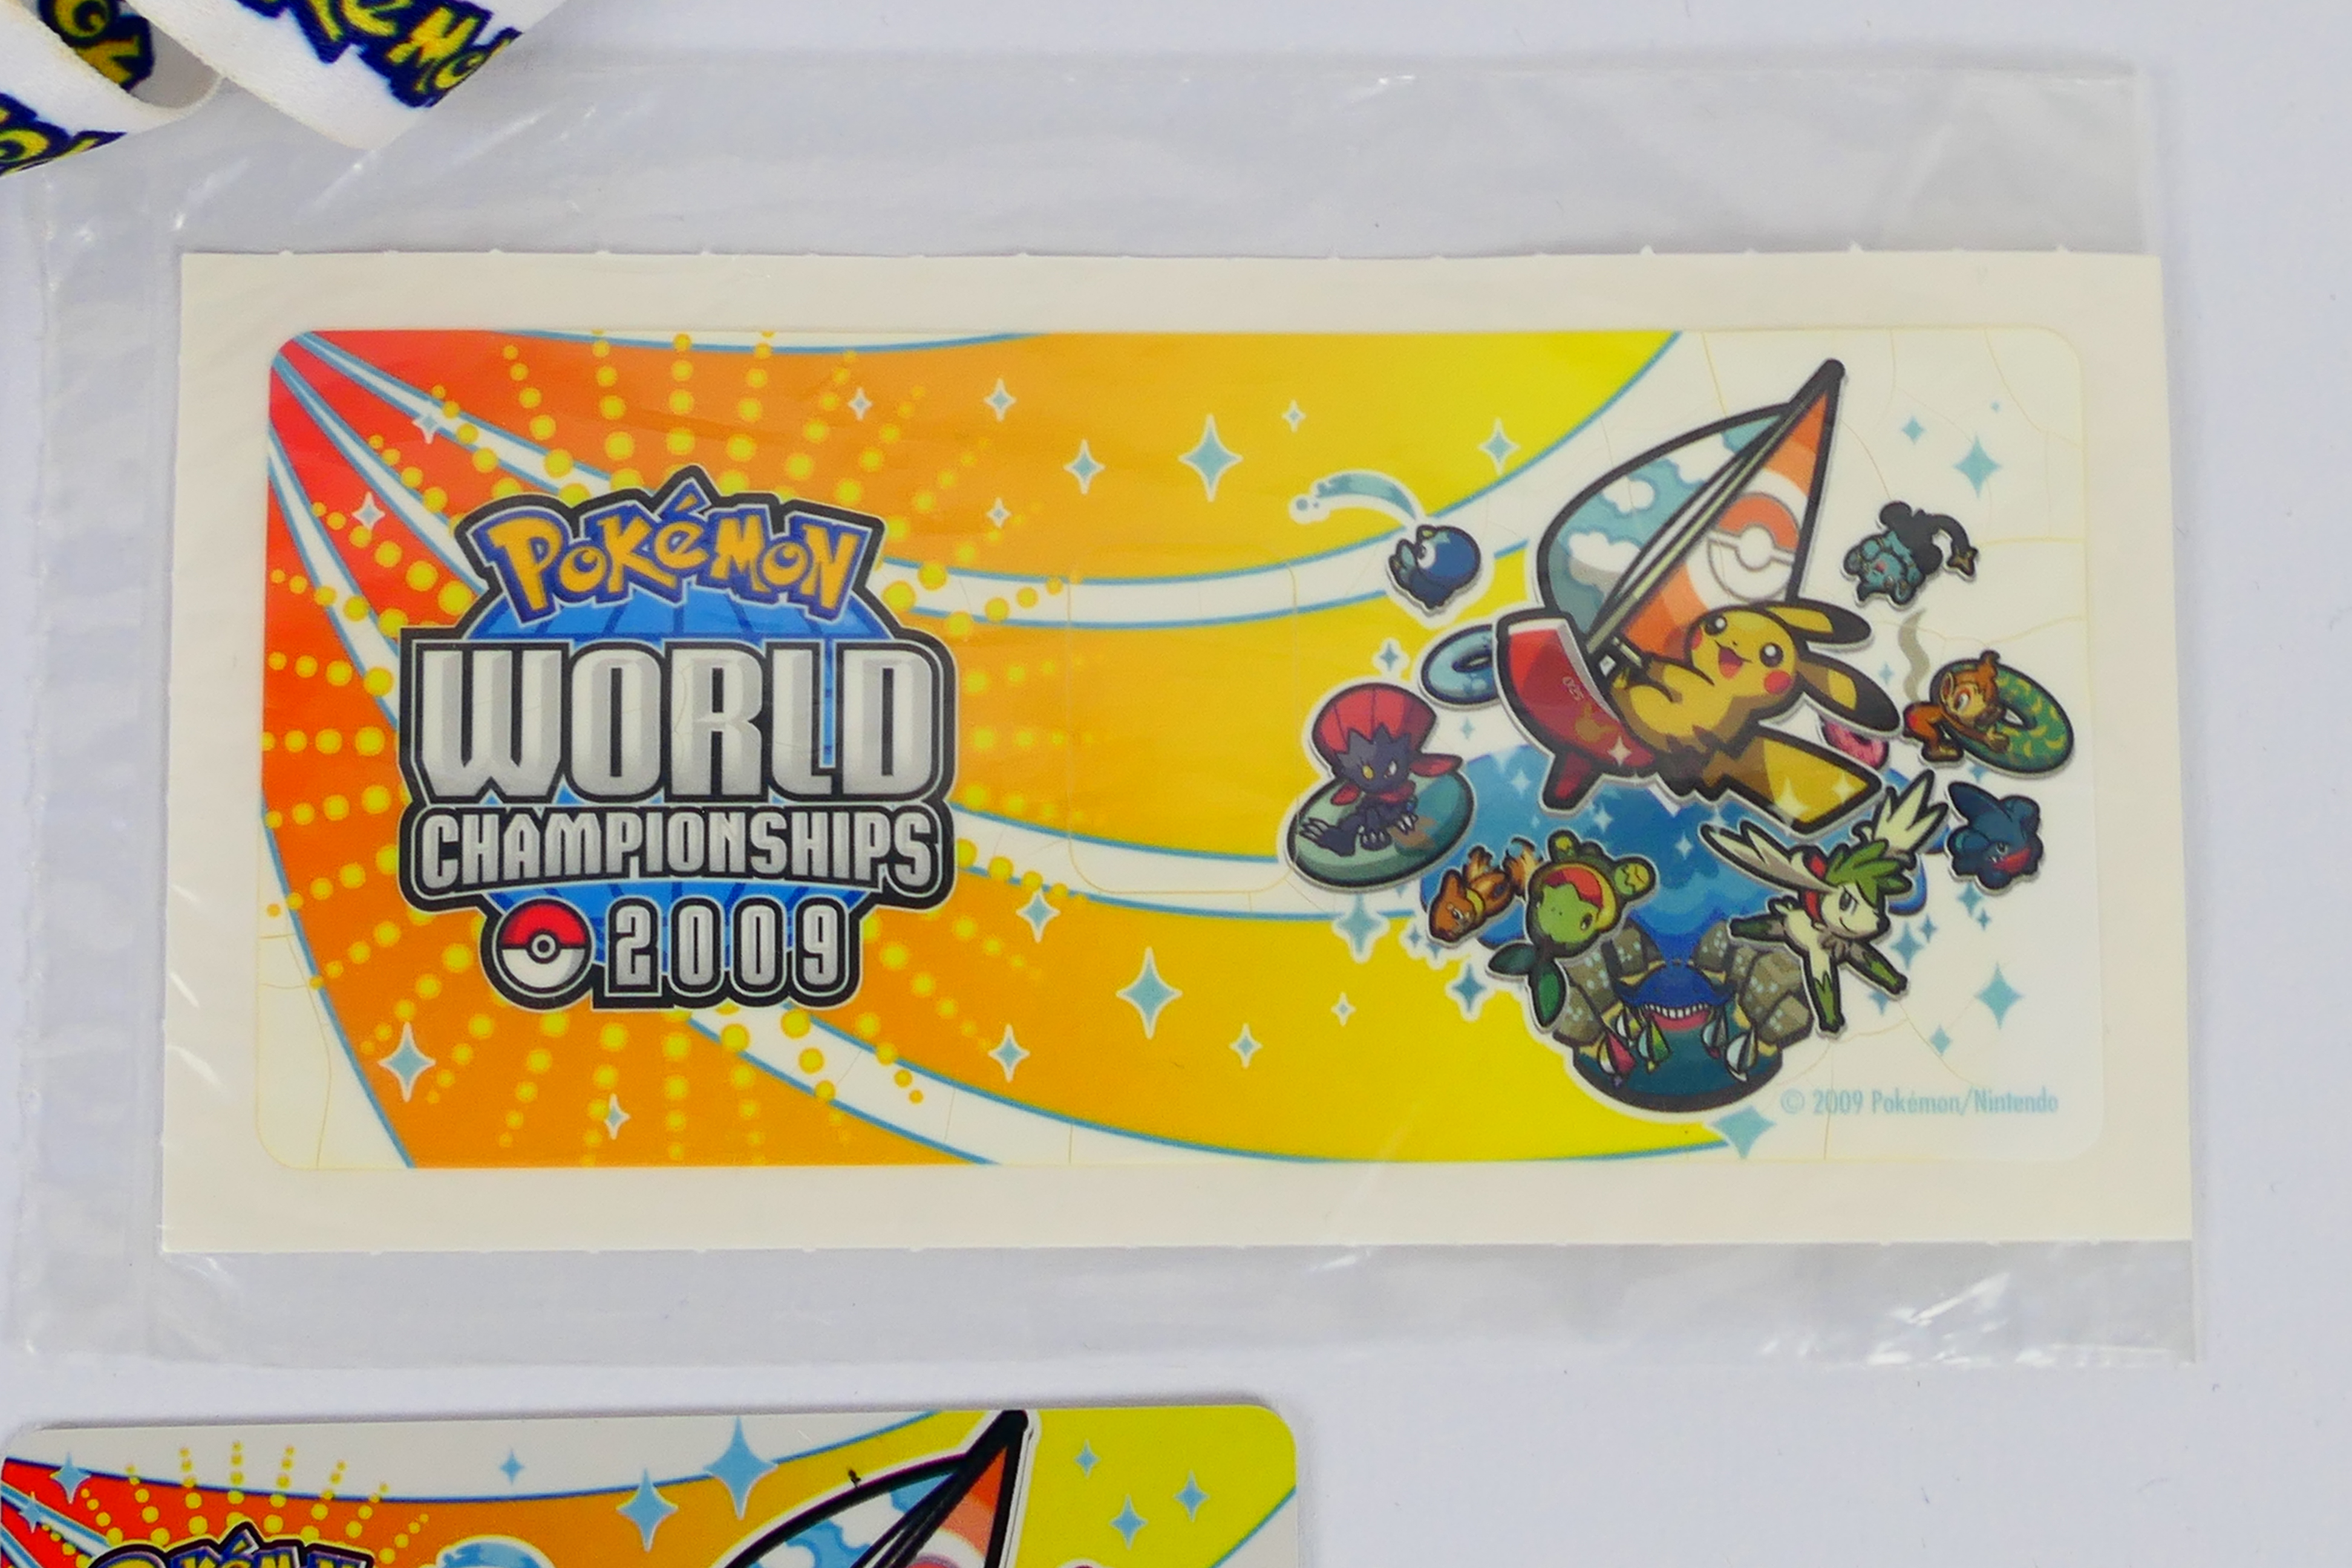 Pokemon - An Official Pokemon TCG World Championships 2009 Competitor Pack from the 2009 World - Image 4 of 8